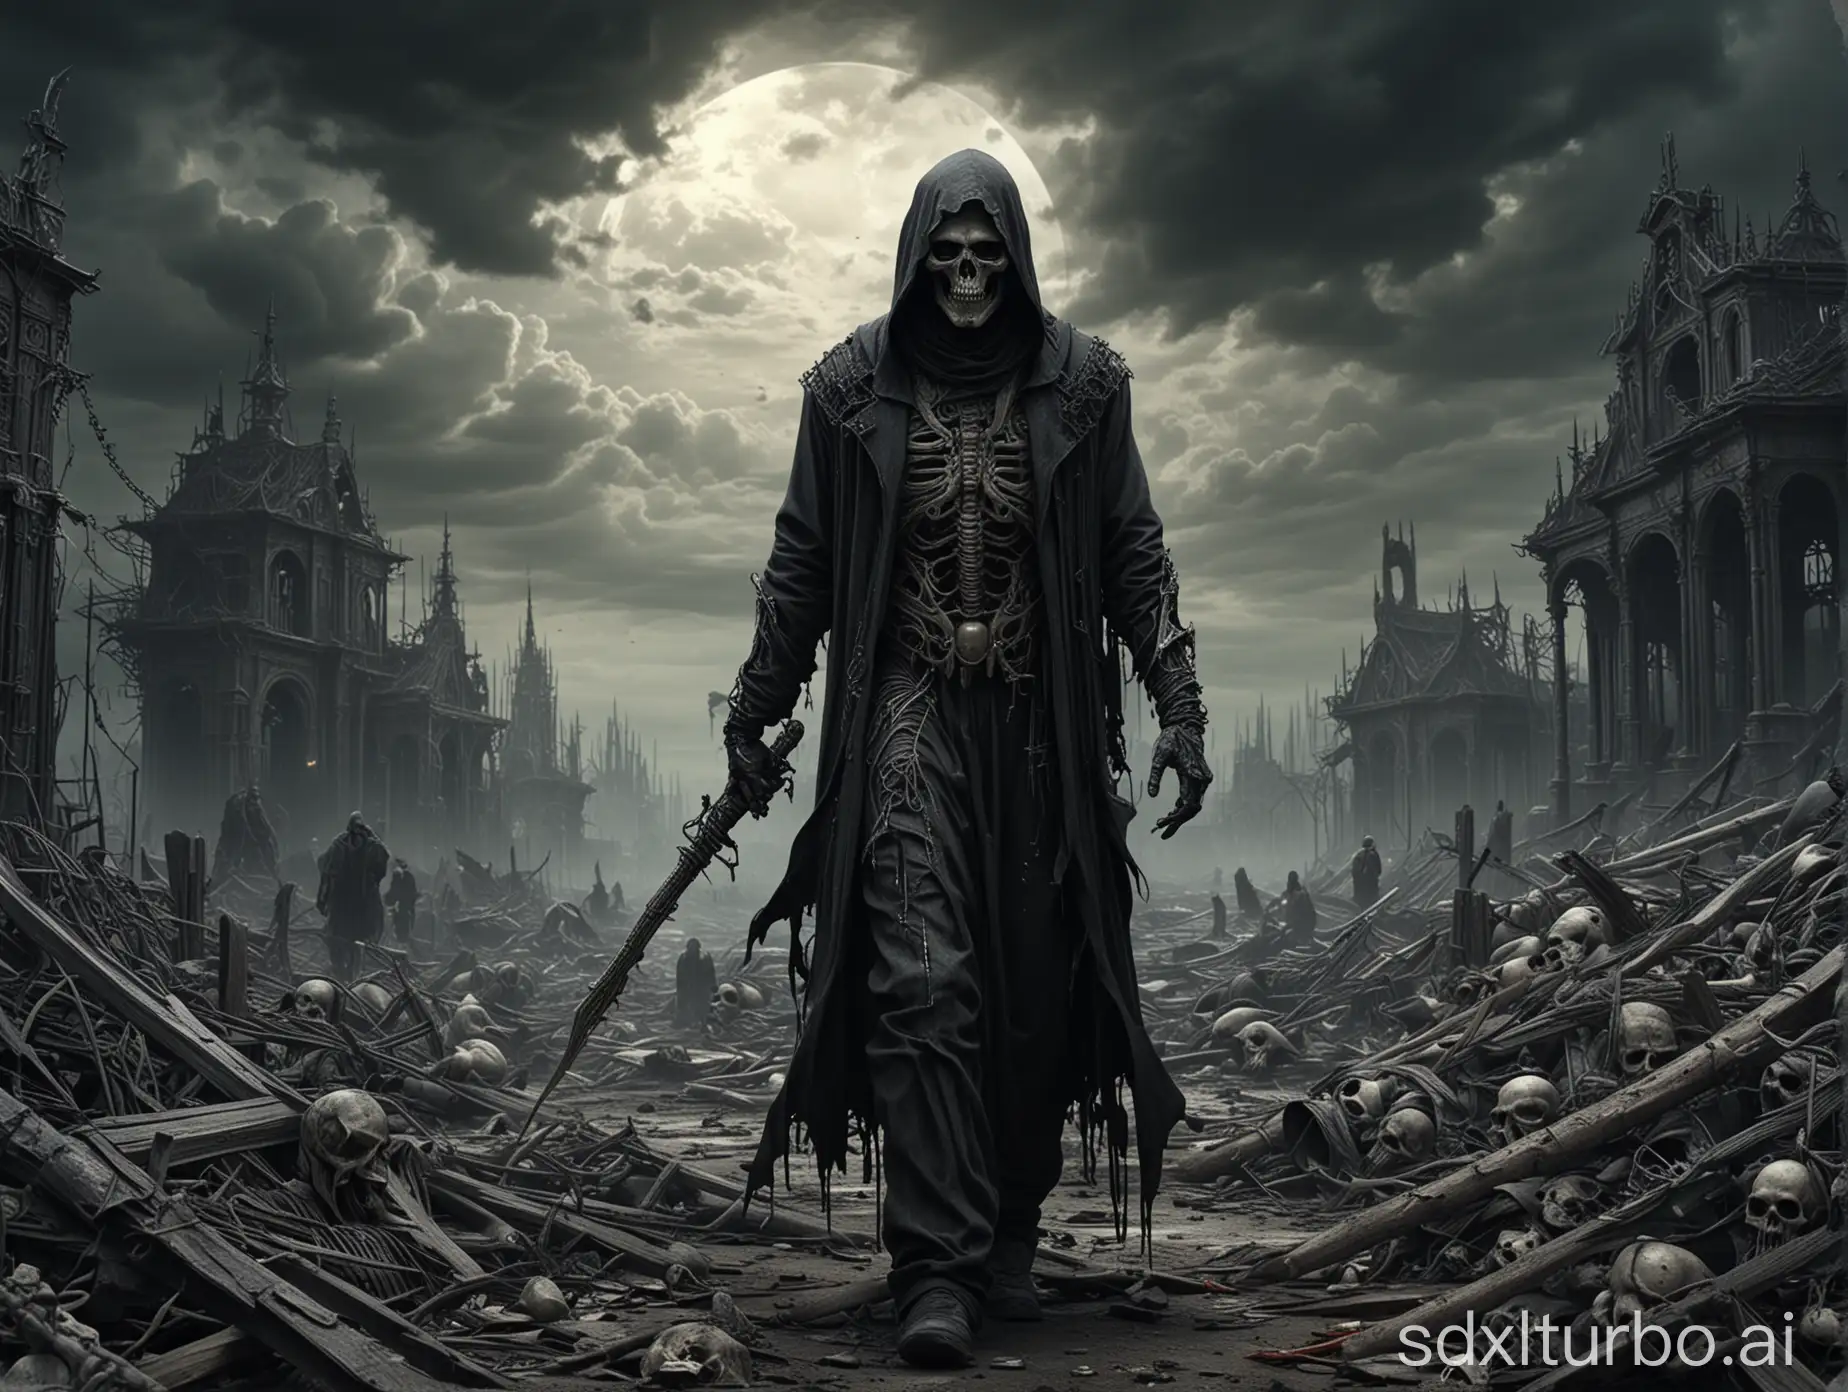 Encounter-with-the-Grim-Reaper-in-an-Apocalyptic-Dystopia